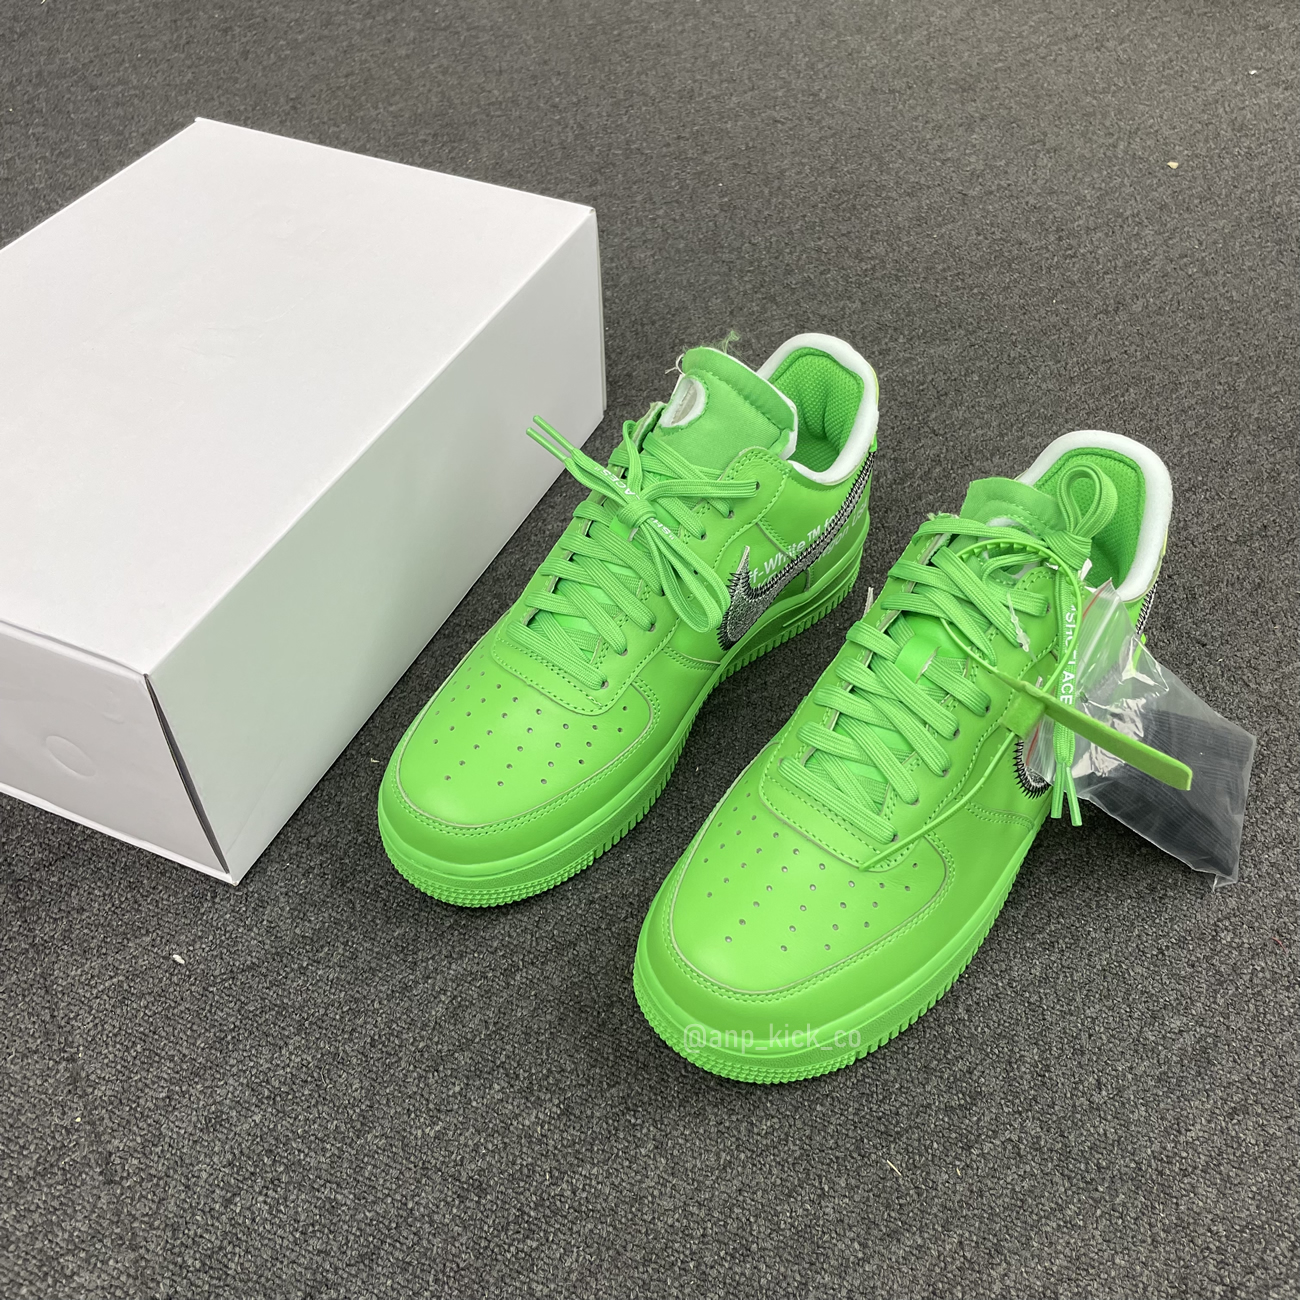 Off White Nike Air Force 1 Low Light Green (17) - newkick.org